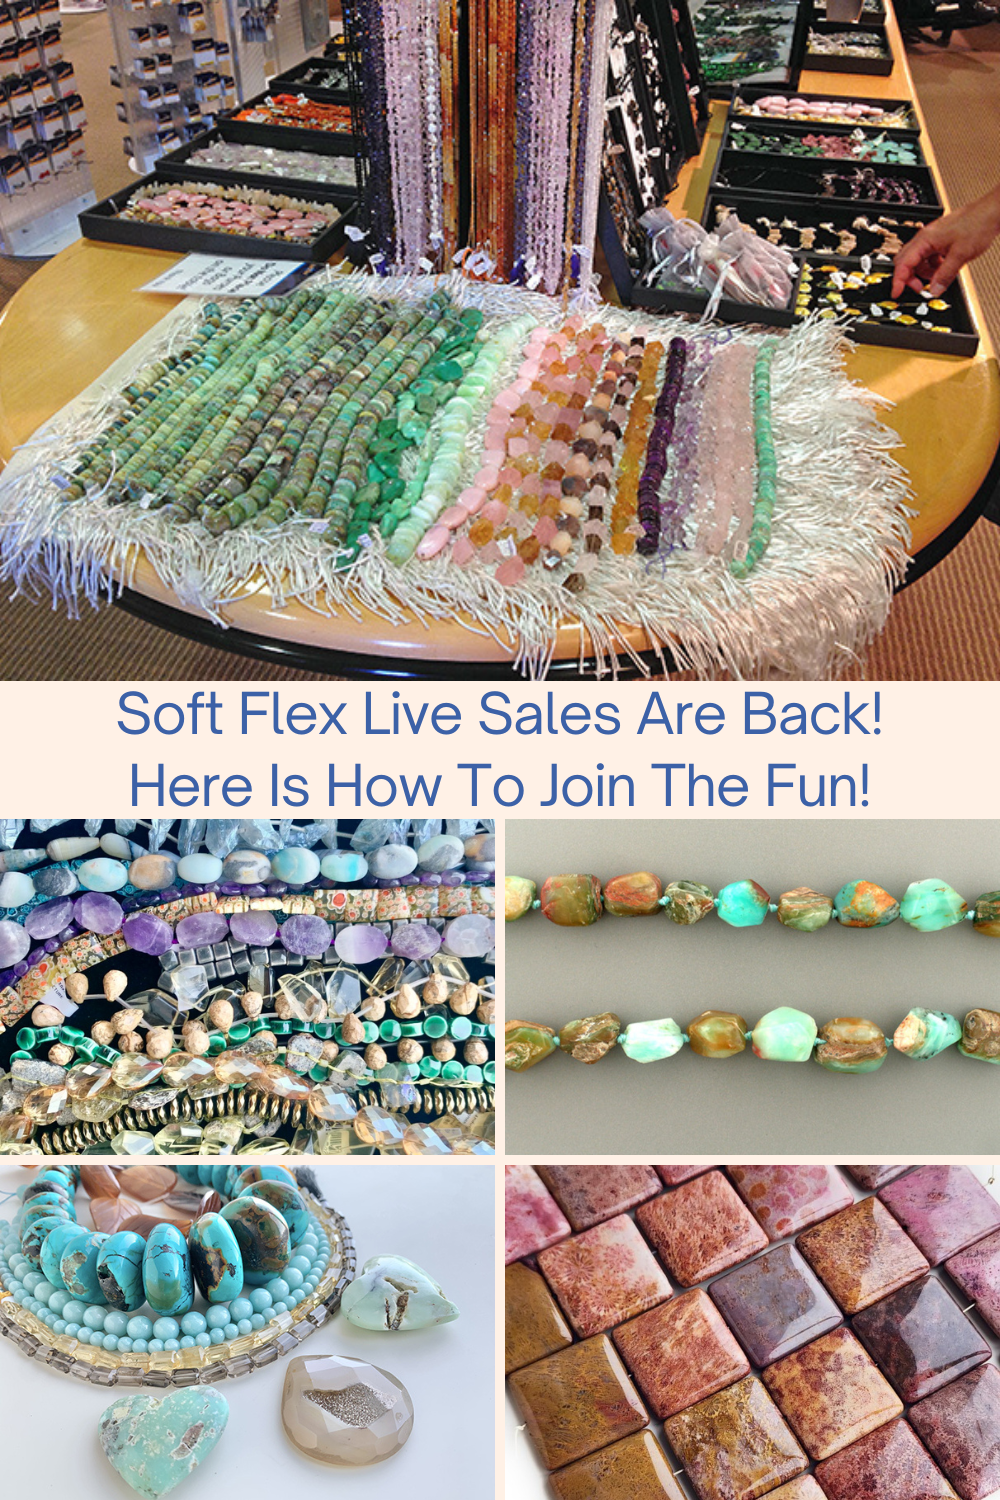 Soft Flex Live Sales Are Back! Here Is How To Join The Fun! Collage